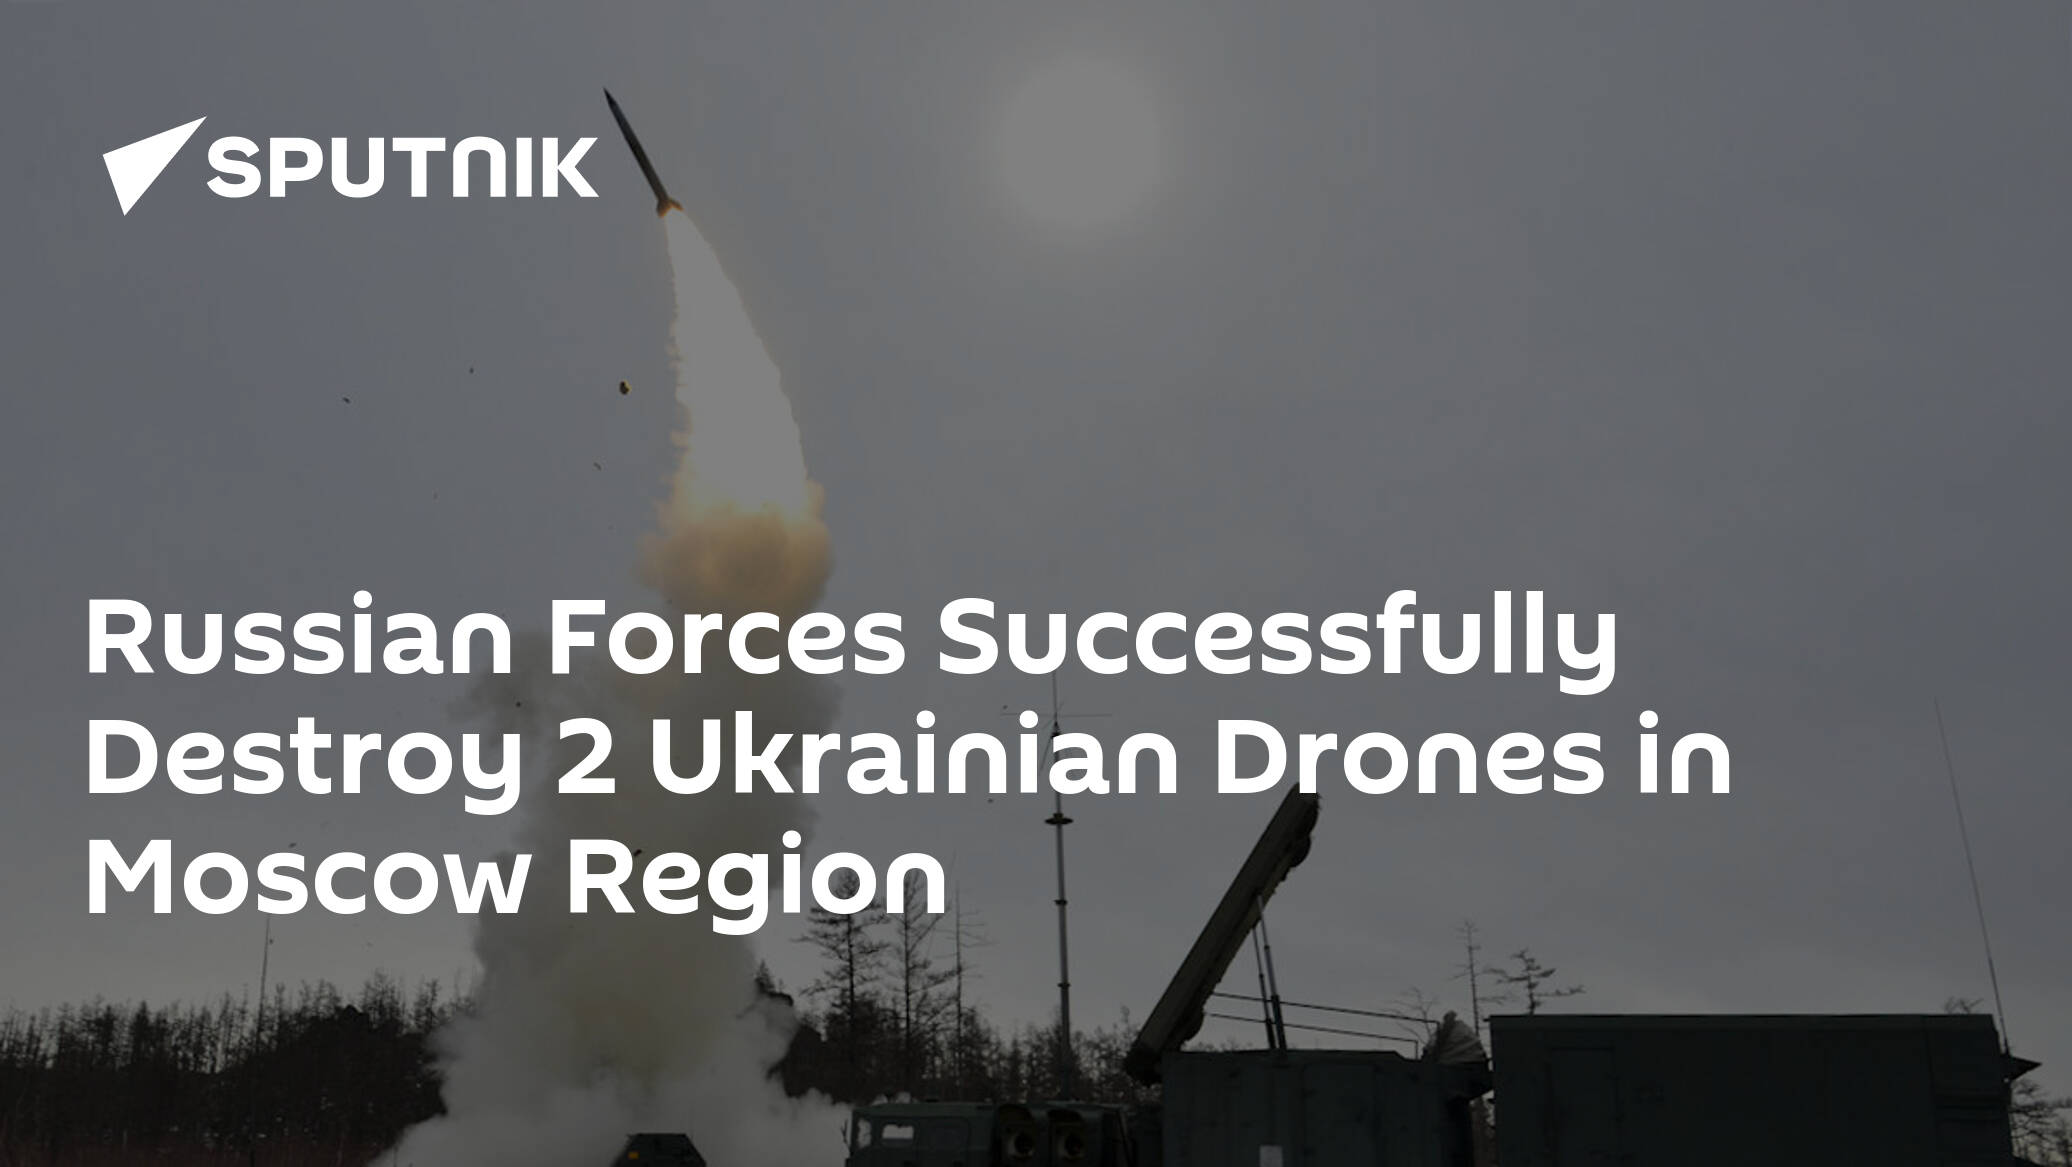 Russian Forces Successfully Destroy 2 Ukrainian Drones in Moscow Region